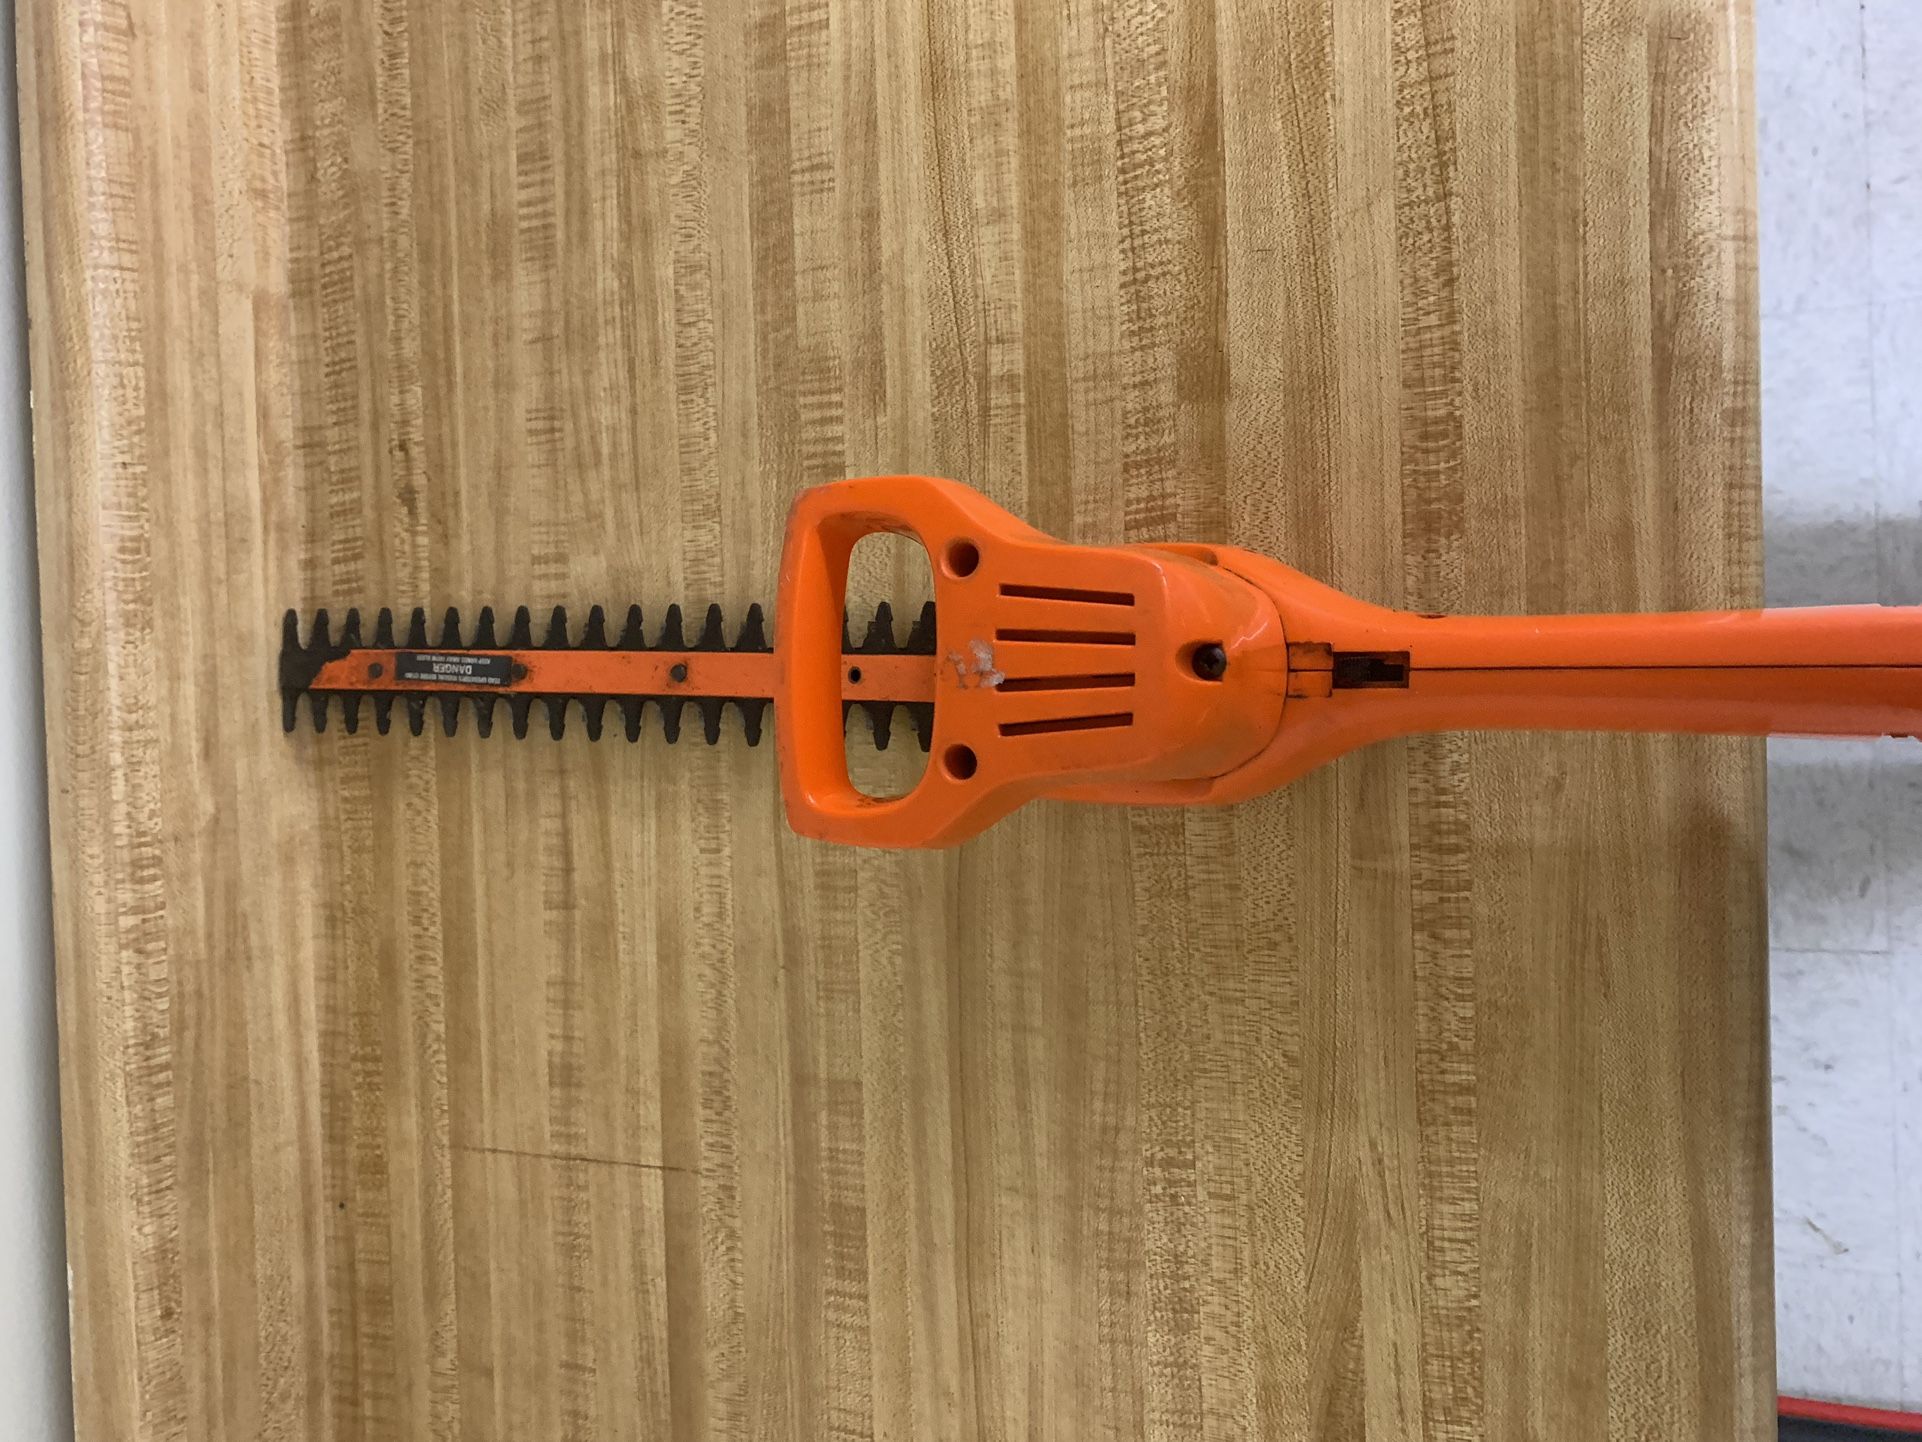 Black and Decker Electric 22 Hedge Trimmer for Sale in Ridgewood, NJ -  OfferUp